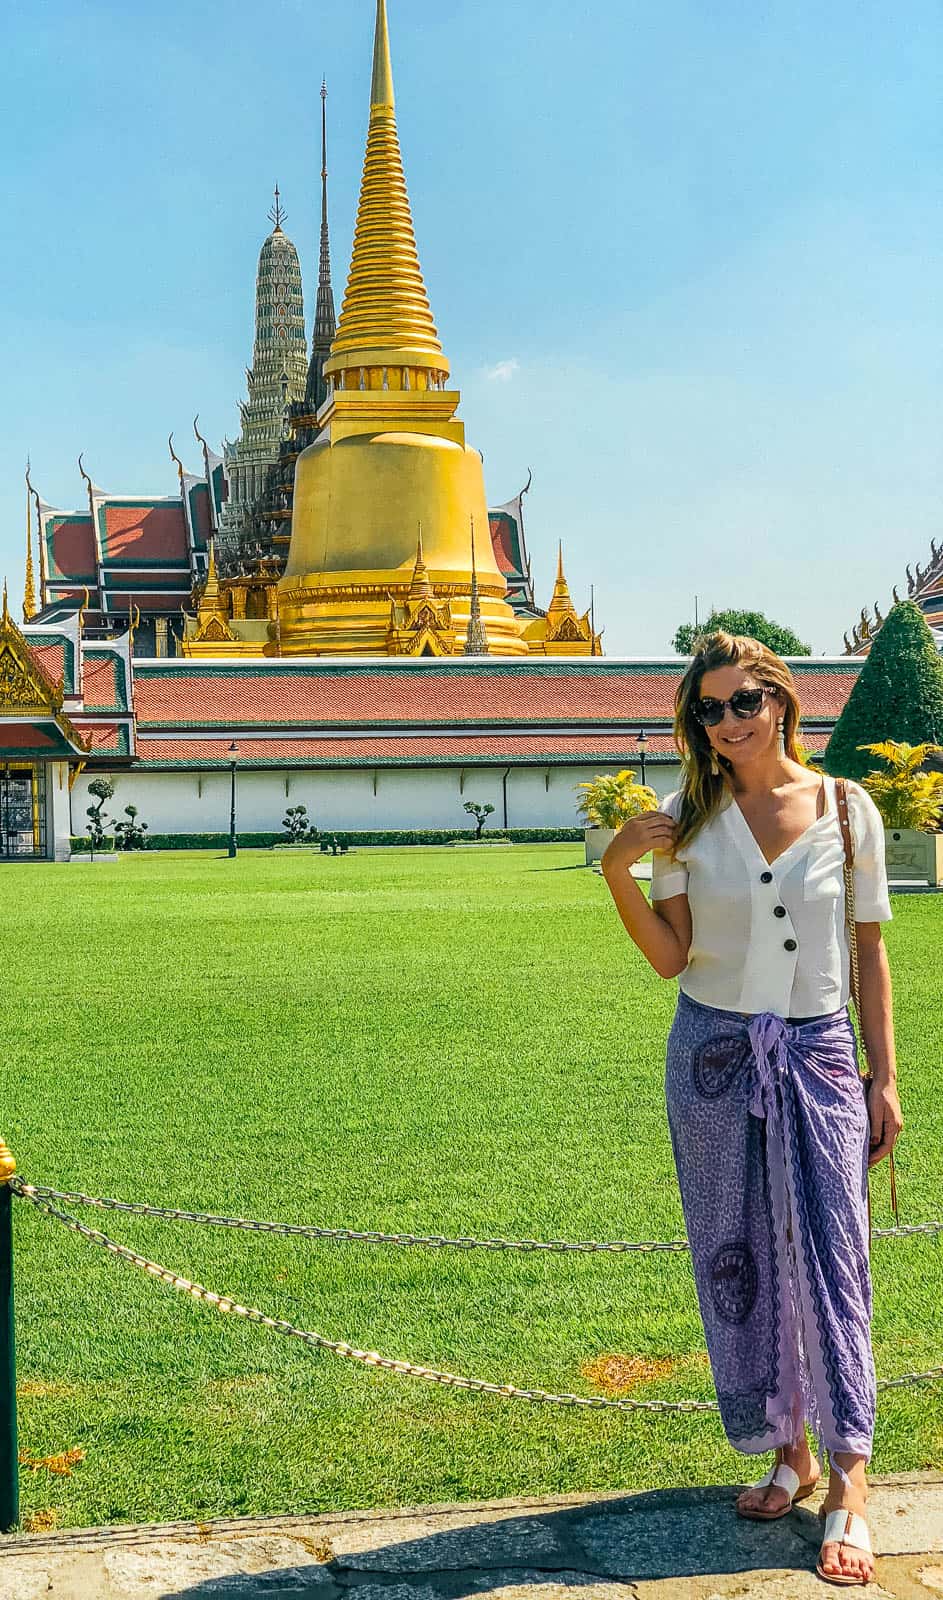 The Grand Palace - What To Do In Bangkok 3 Day Itinerary